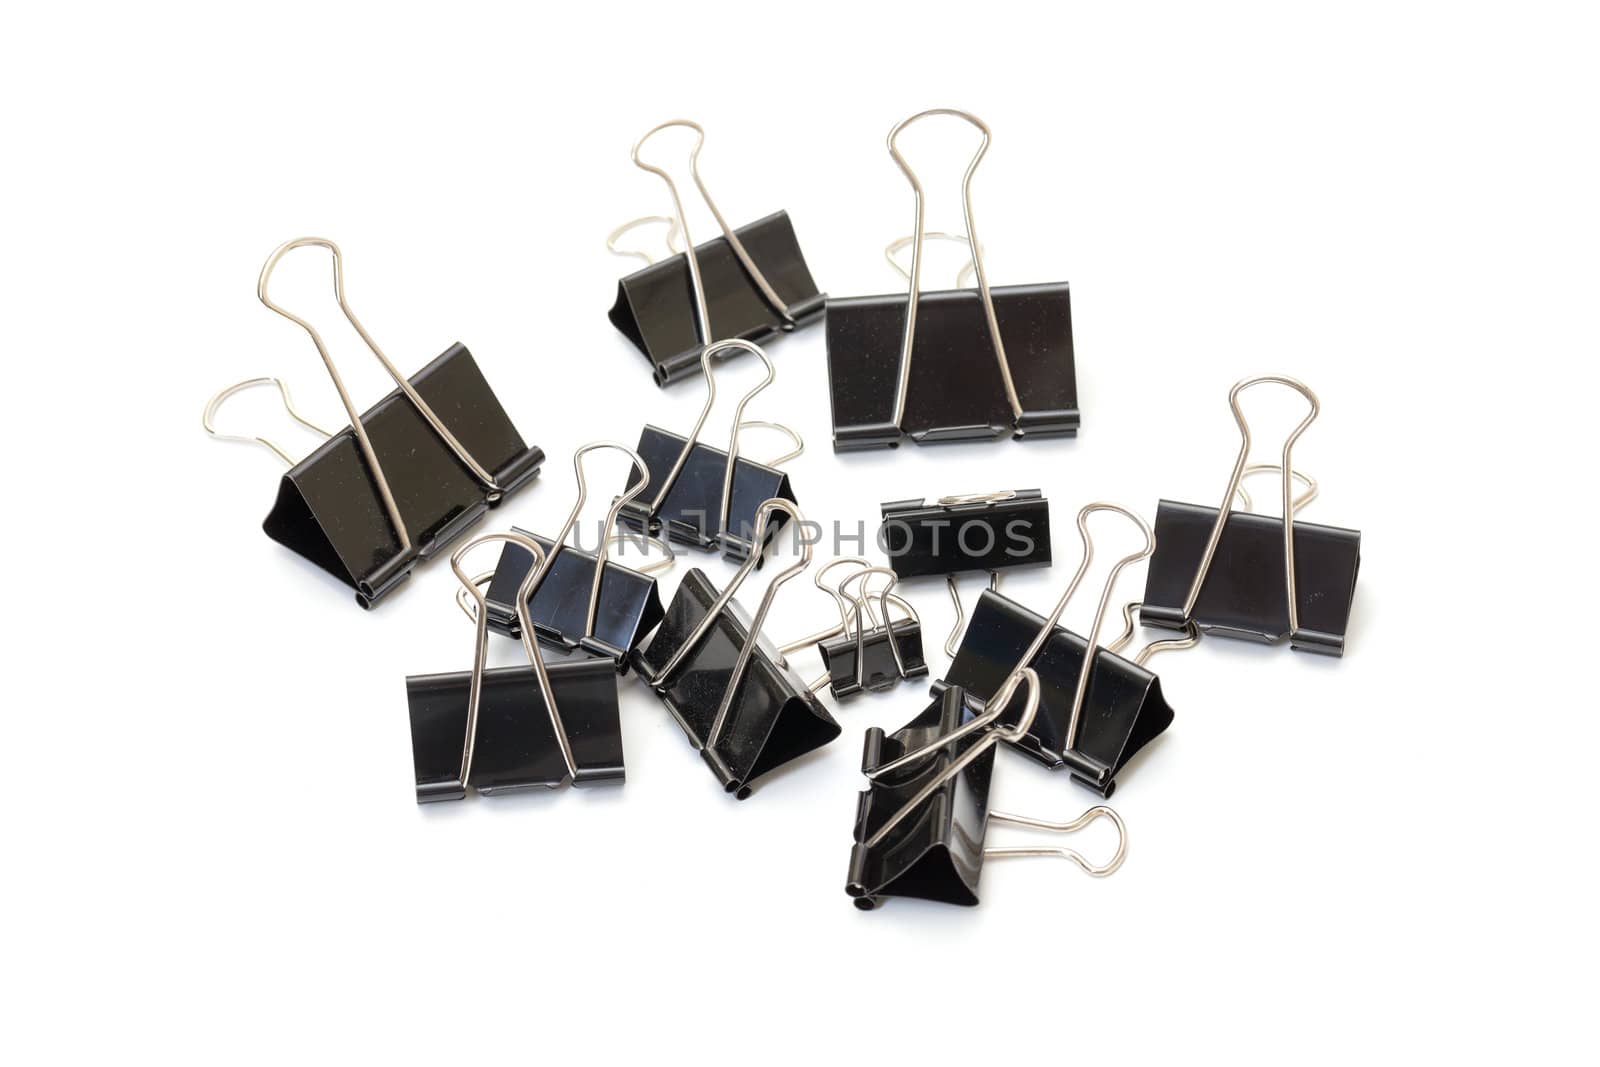 Paper Clips on White Background